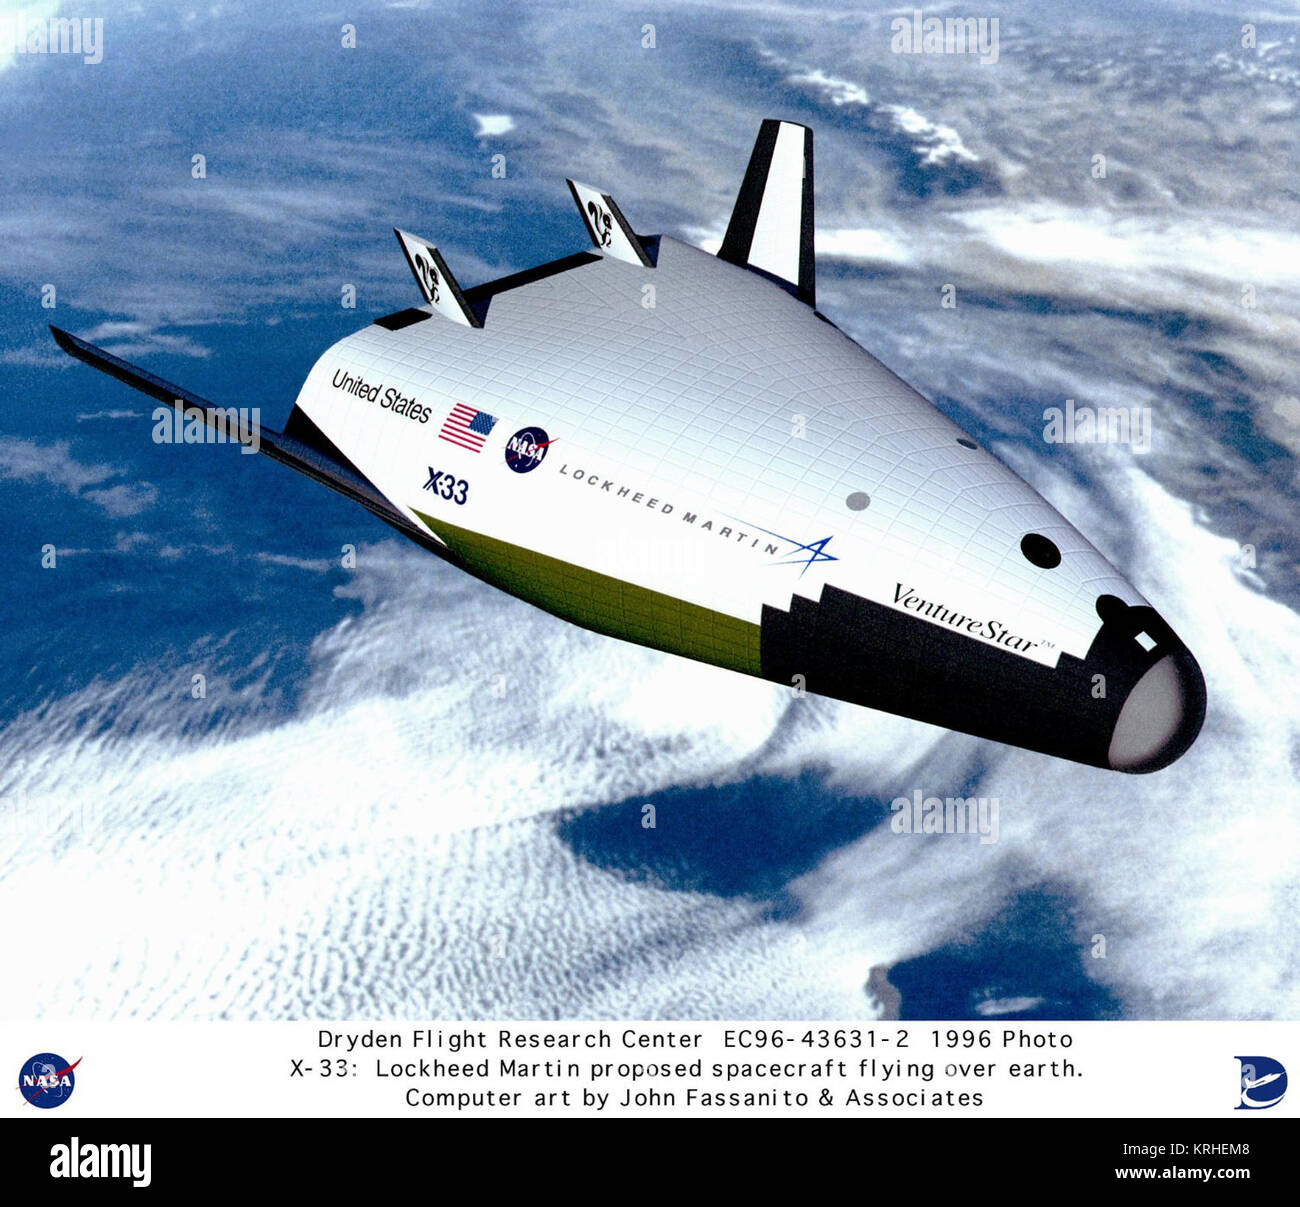 This is an artist's conception of the NASA/Lockheed Martin Single-Stage-To-Orbit (SSTO) Reusable Launch Vehicle (RLV) in orbit high above the Earth. NASA's Dryden Flight Research Center, Edwards, California, expected to play a key role in the development and flight testing of the X-33, which was a technology demonstrator vehicle for a possible RLV. The RLV technology program was a cooperative agreement between NASA and industry. The goal of the RLV technology program was to enable significant reductions in the cost of access to space, and to promote the creation and delivery of new space servi Stock Photo